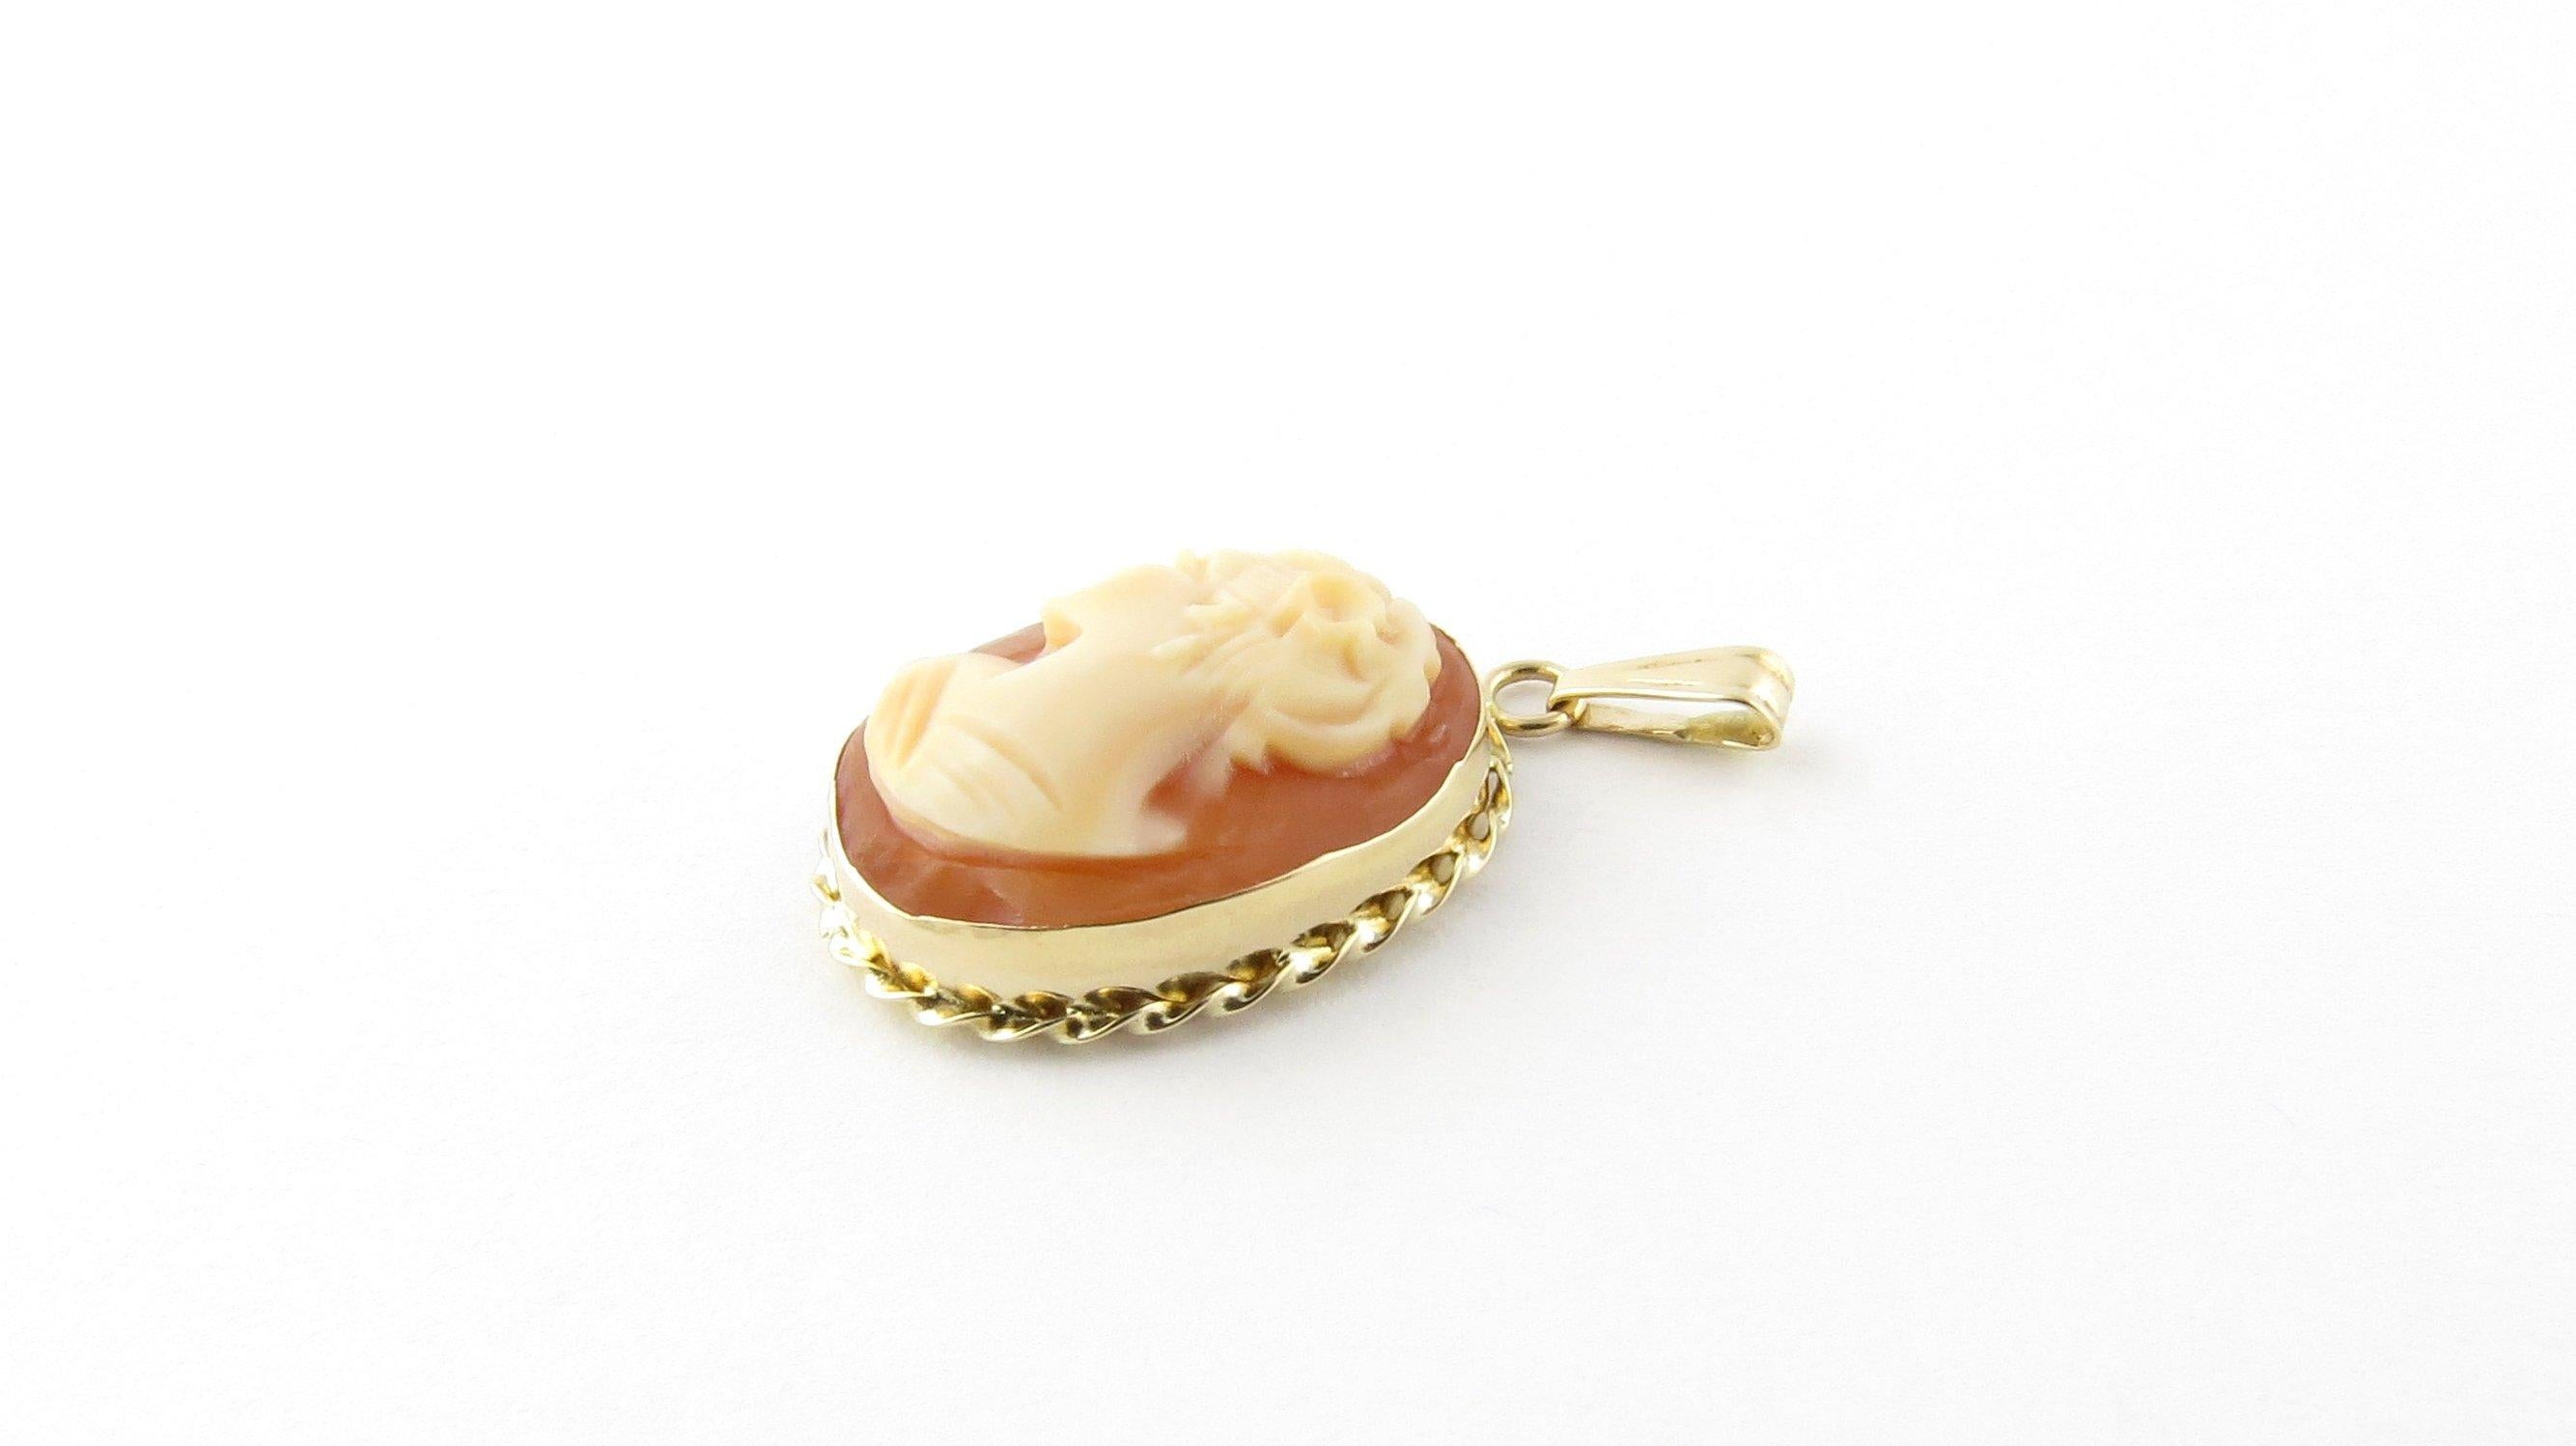 Vintage 14 Karat Yellow Gold Cameo Pendant- 
This lovely cameo pendant features an elegant lady in profile framed in beautifully detailed 14K yellow gold. 
Size: 20 mm x 13 mm (actual pendant) 
Weight: 1.1 dwt. / 1.8 gr. 
Hallmark: Acid tested for